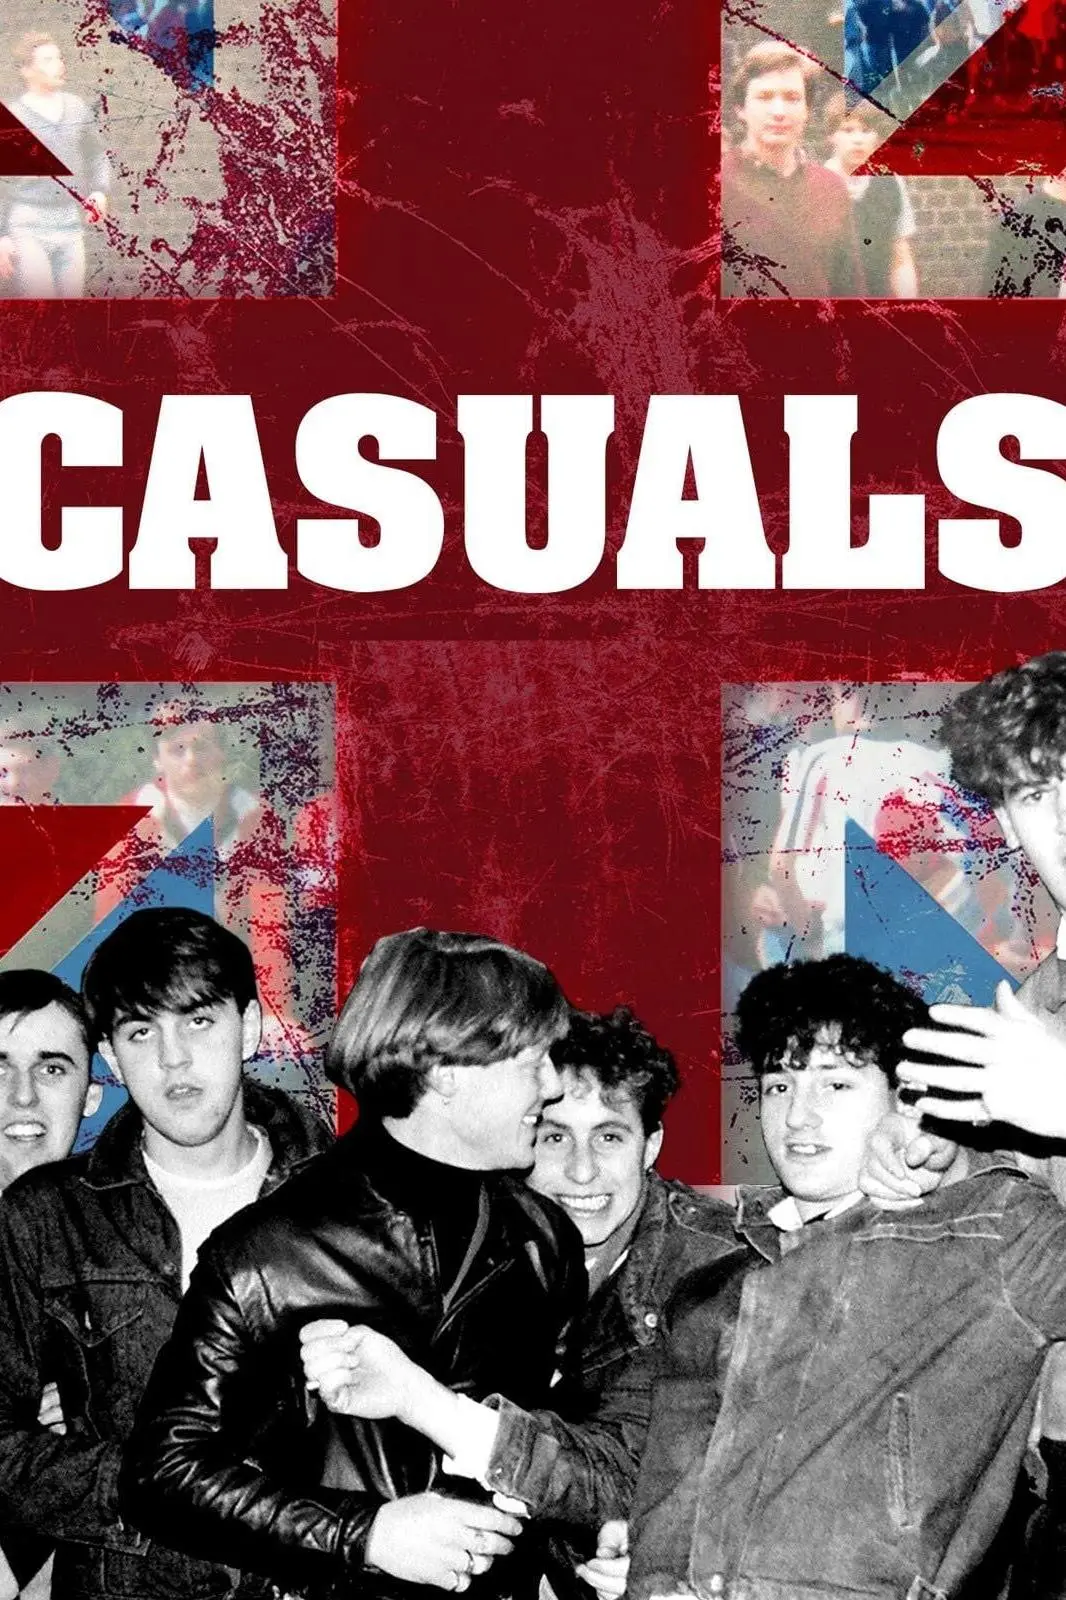 Casuals: The Story of the Legendary Terrace Fashion_peliplat